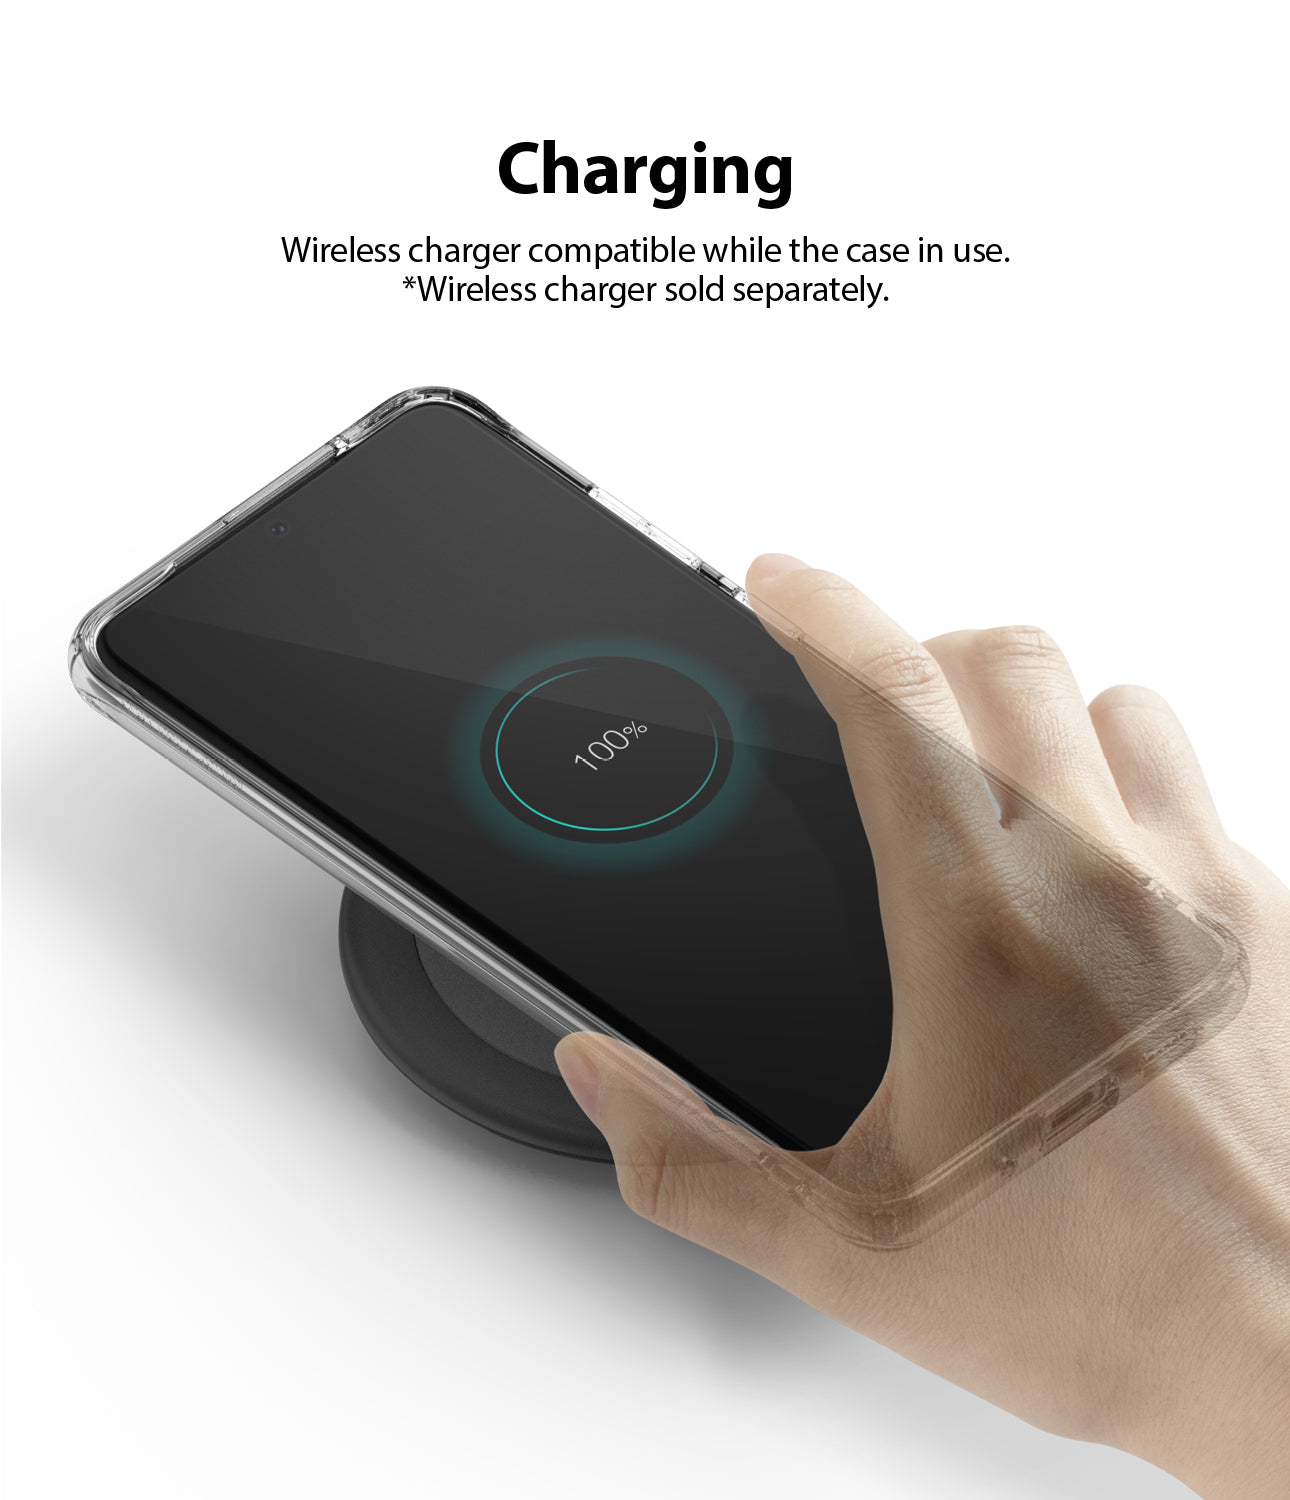 wireless charging / powershare compatible with the case on